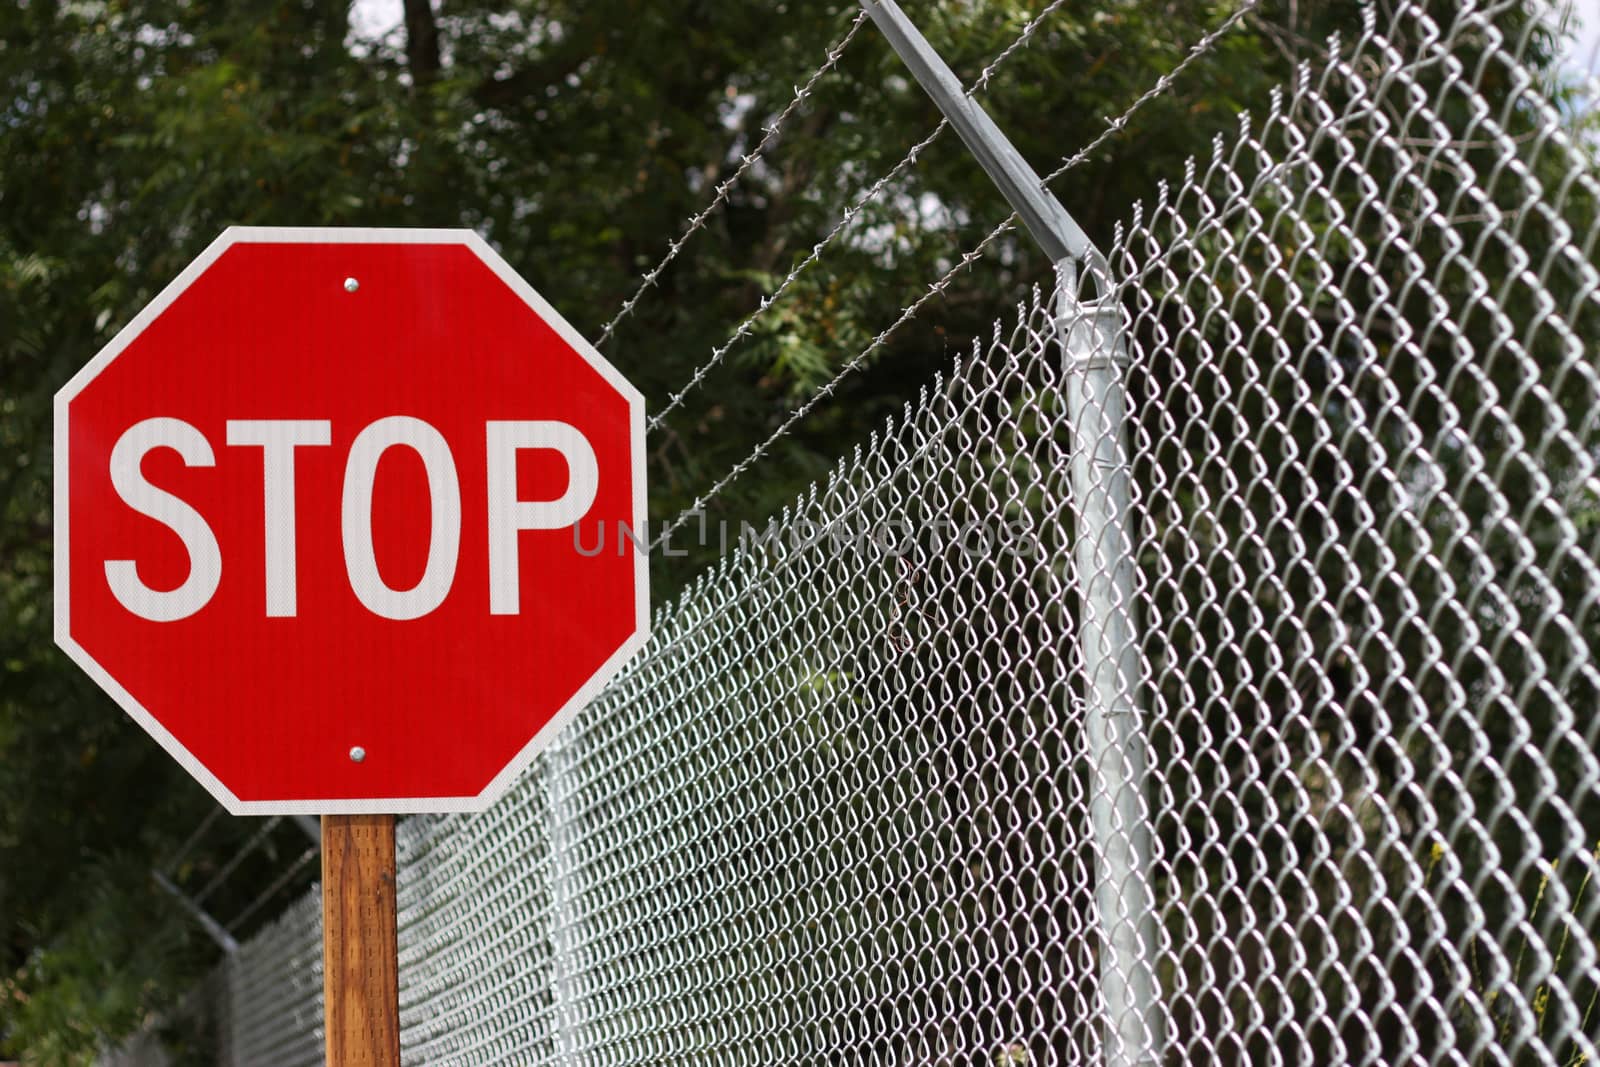 Red Stop Sign near the fence